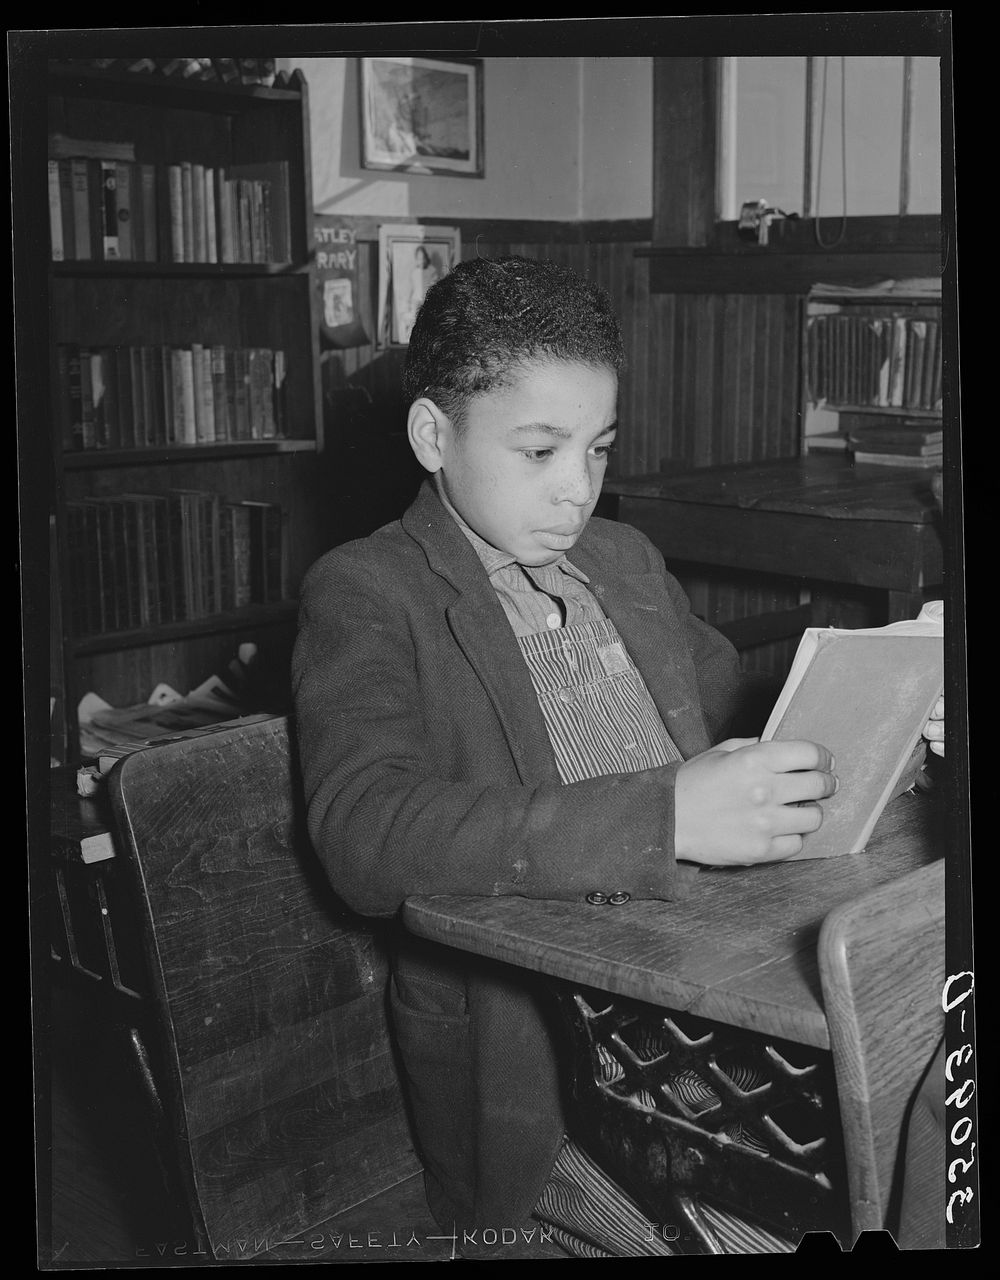 Son of Pomp Hall, tenant farmer, studying in rural school. Creek County, Oklahoma. See general caption number 23 by Russell…